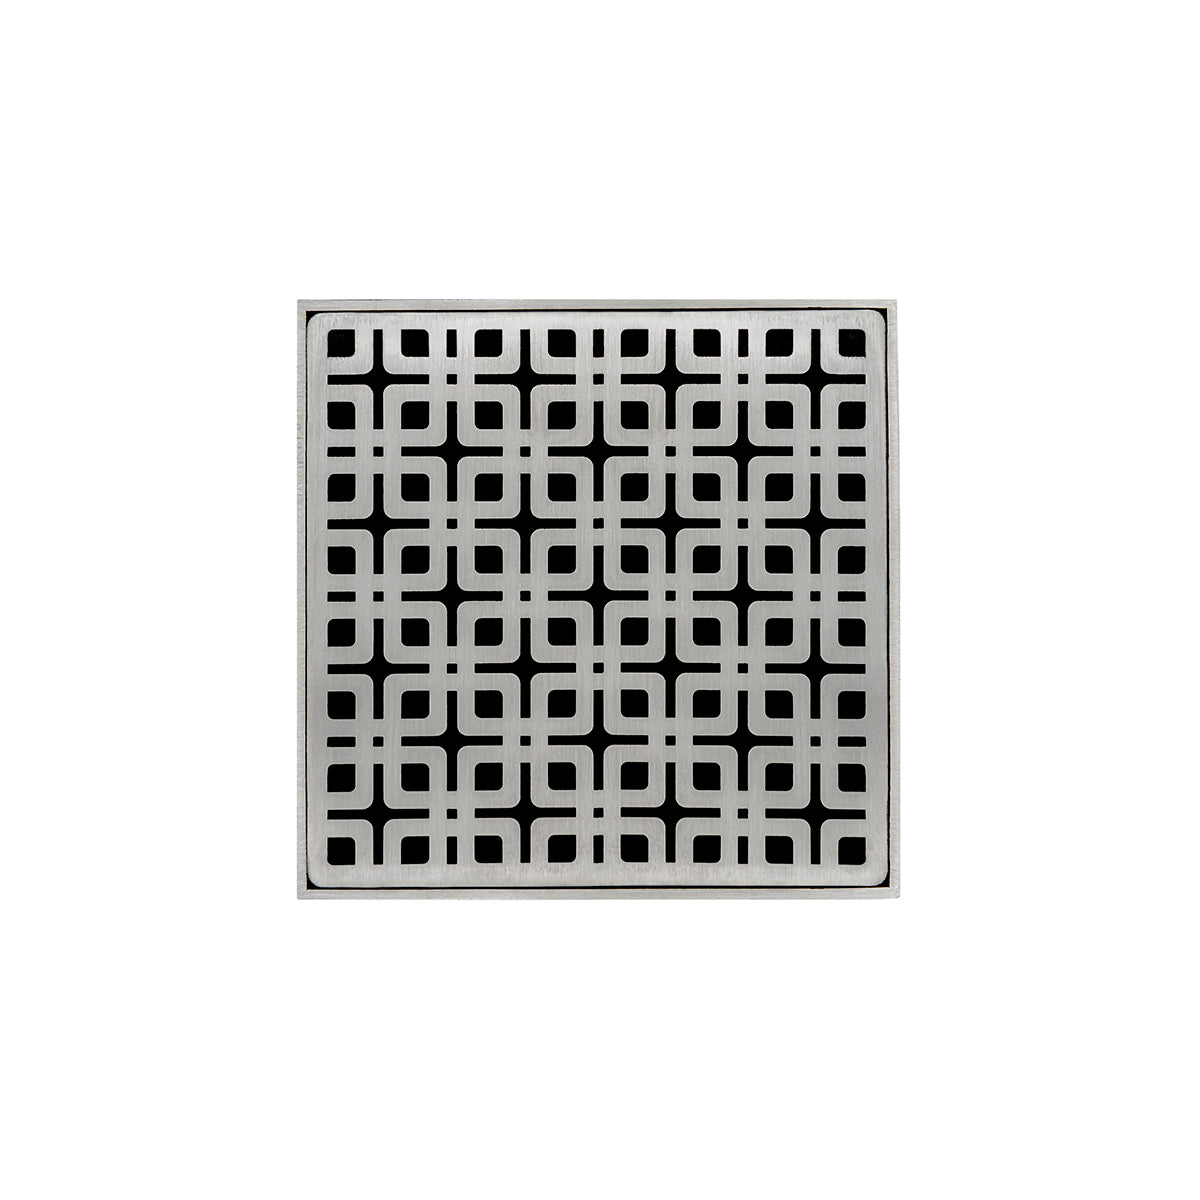 Infinity Drain 5" x 5" KD 5 High Flow Premium Center Drain Kit with Link Pattern Decorative Plate with Cast Iron Drain Body, 3" No-Hub Outlet